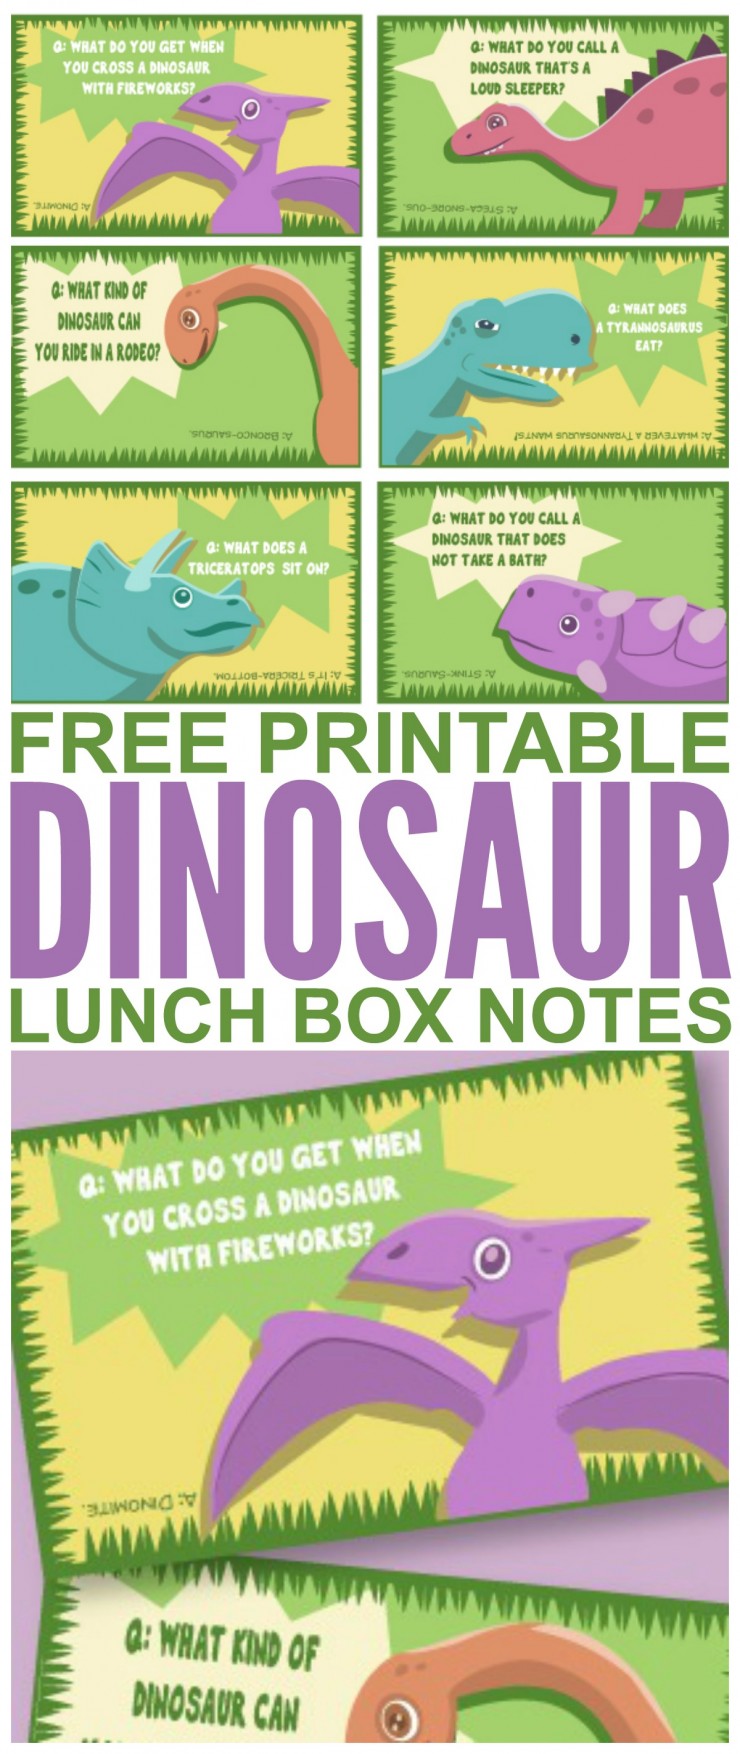 Free Printable Dinosaur Lunch Box Notes - super cute dinosaur themed jokes perfect for tucking into your kids lunch!